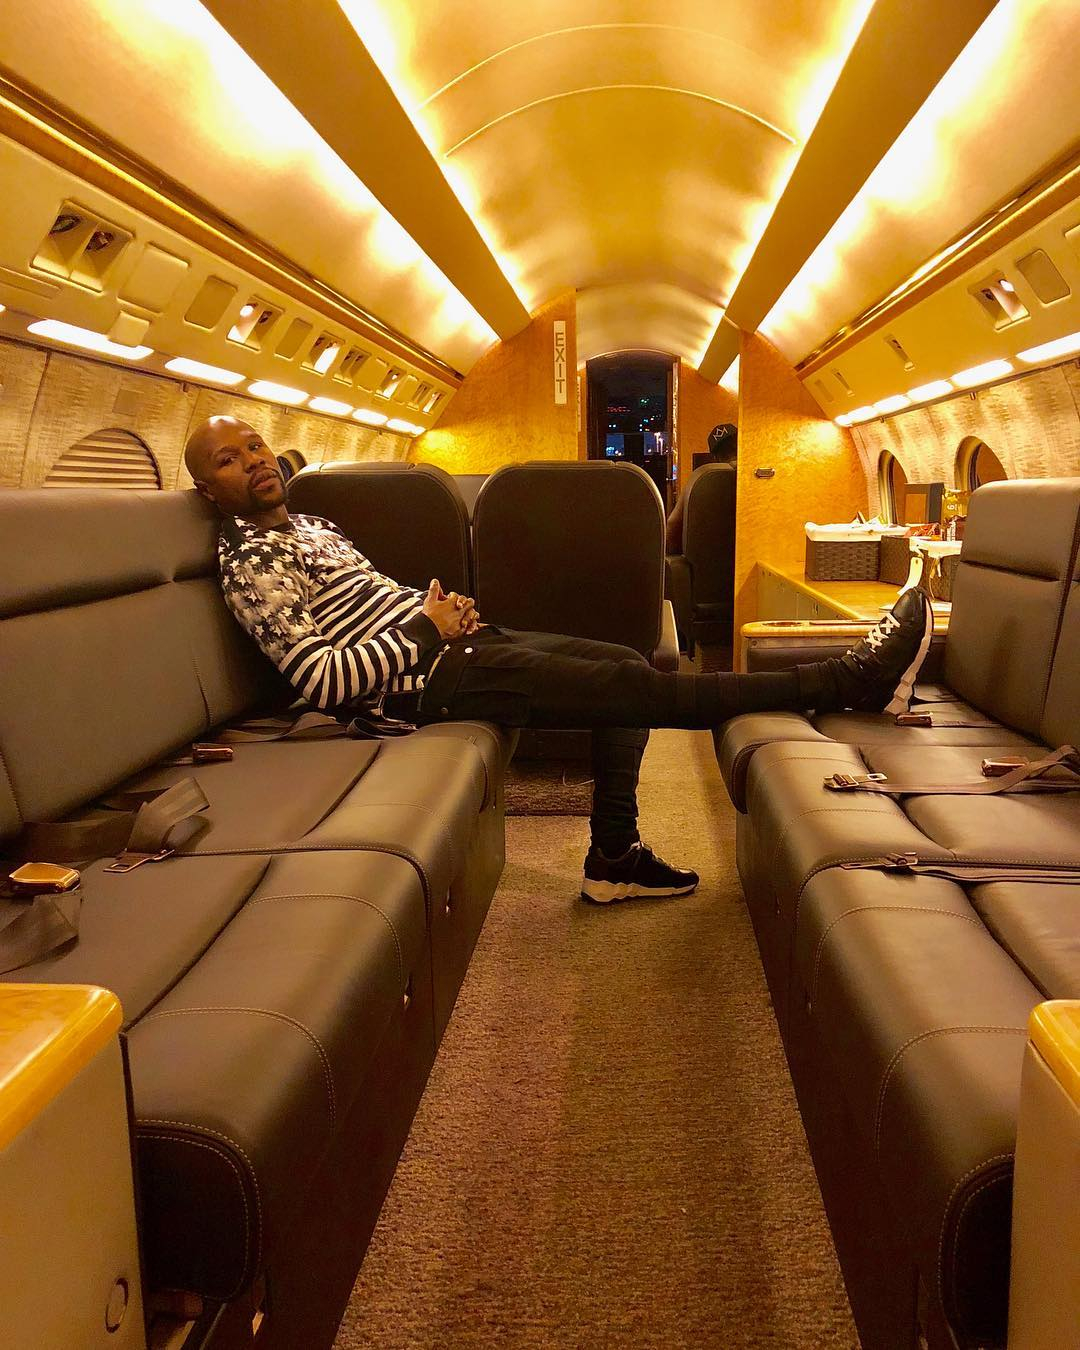 Floyd Mayweather's private jet worth $50 million with his name on it, masseuses, TVs, luxurious seats and big-money poker